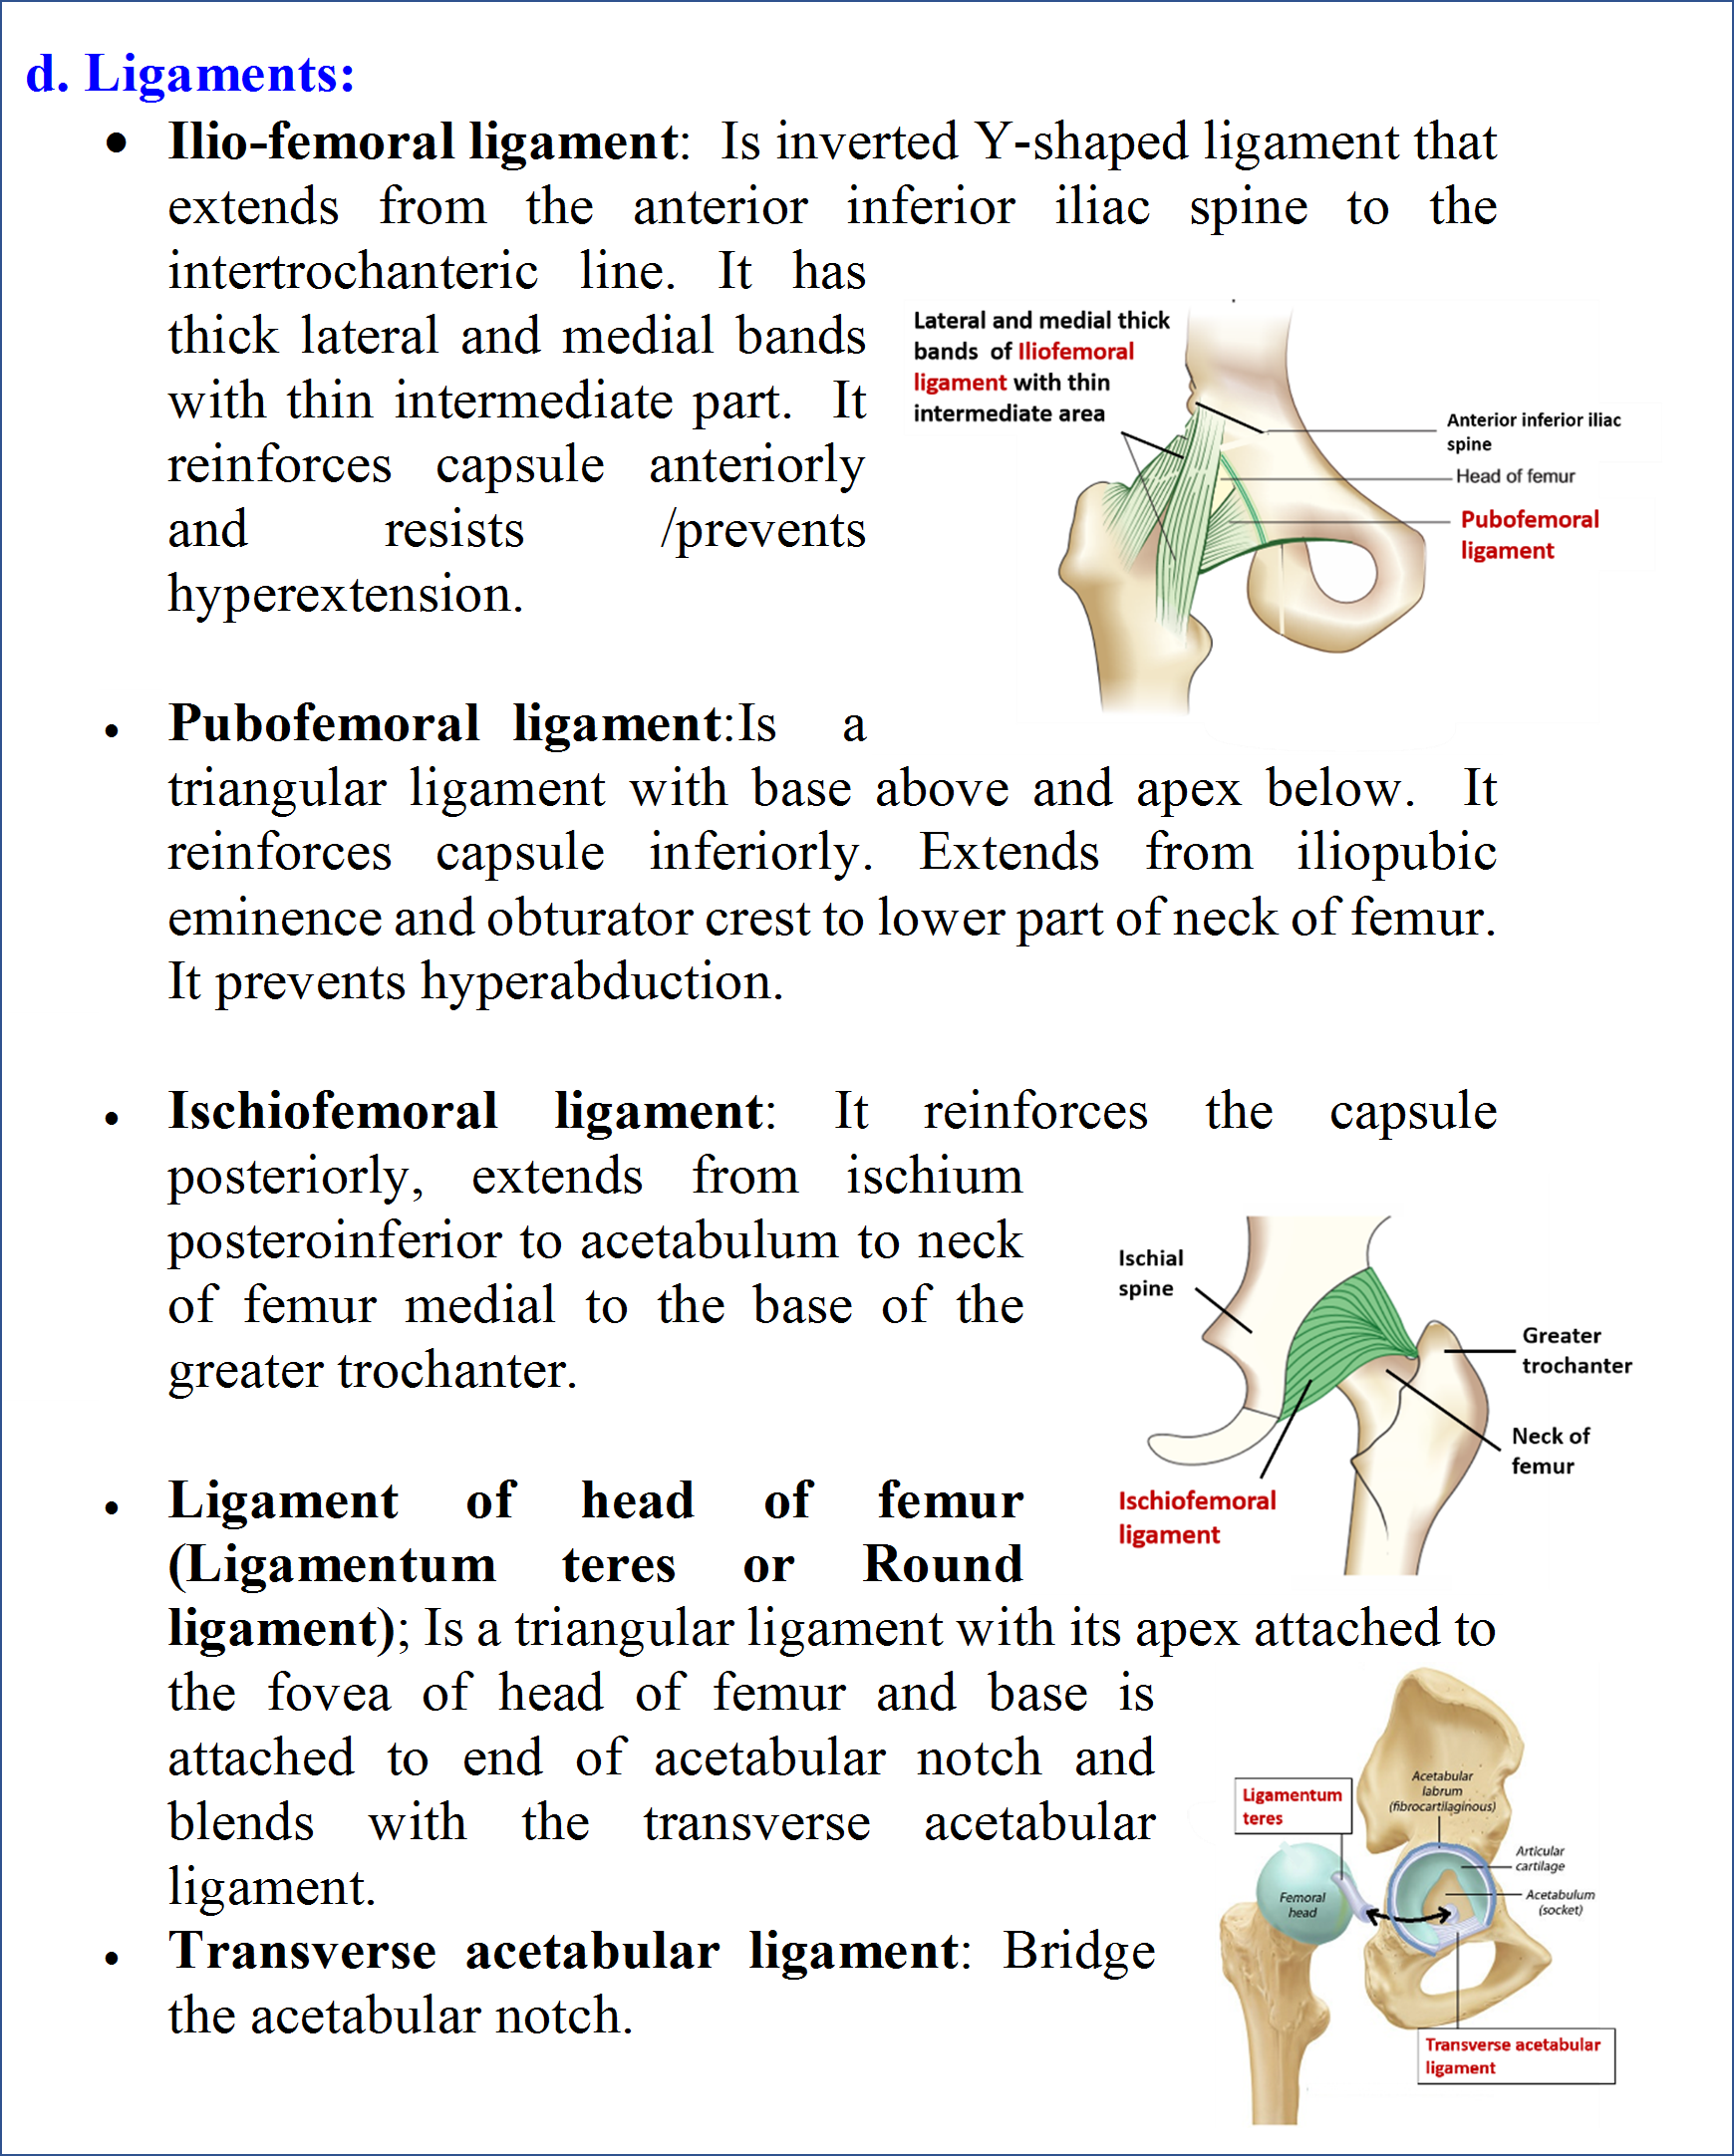 Ligaments of hip joint